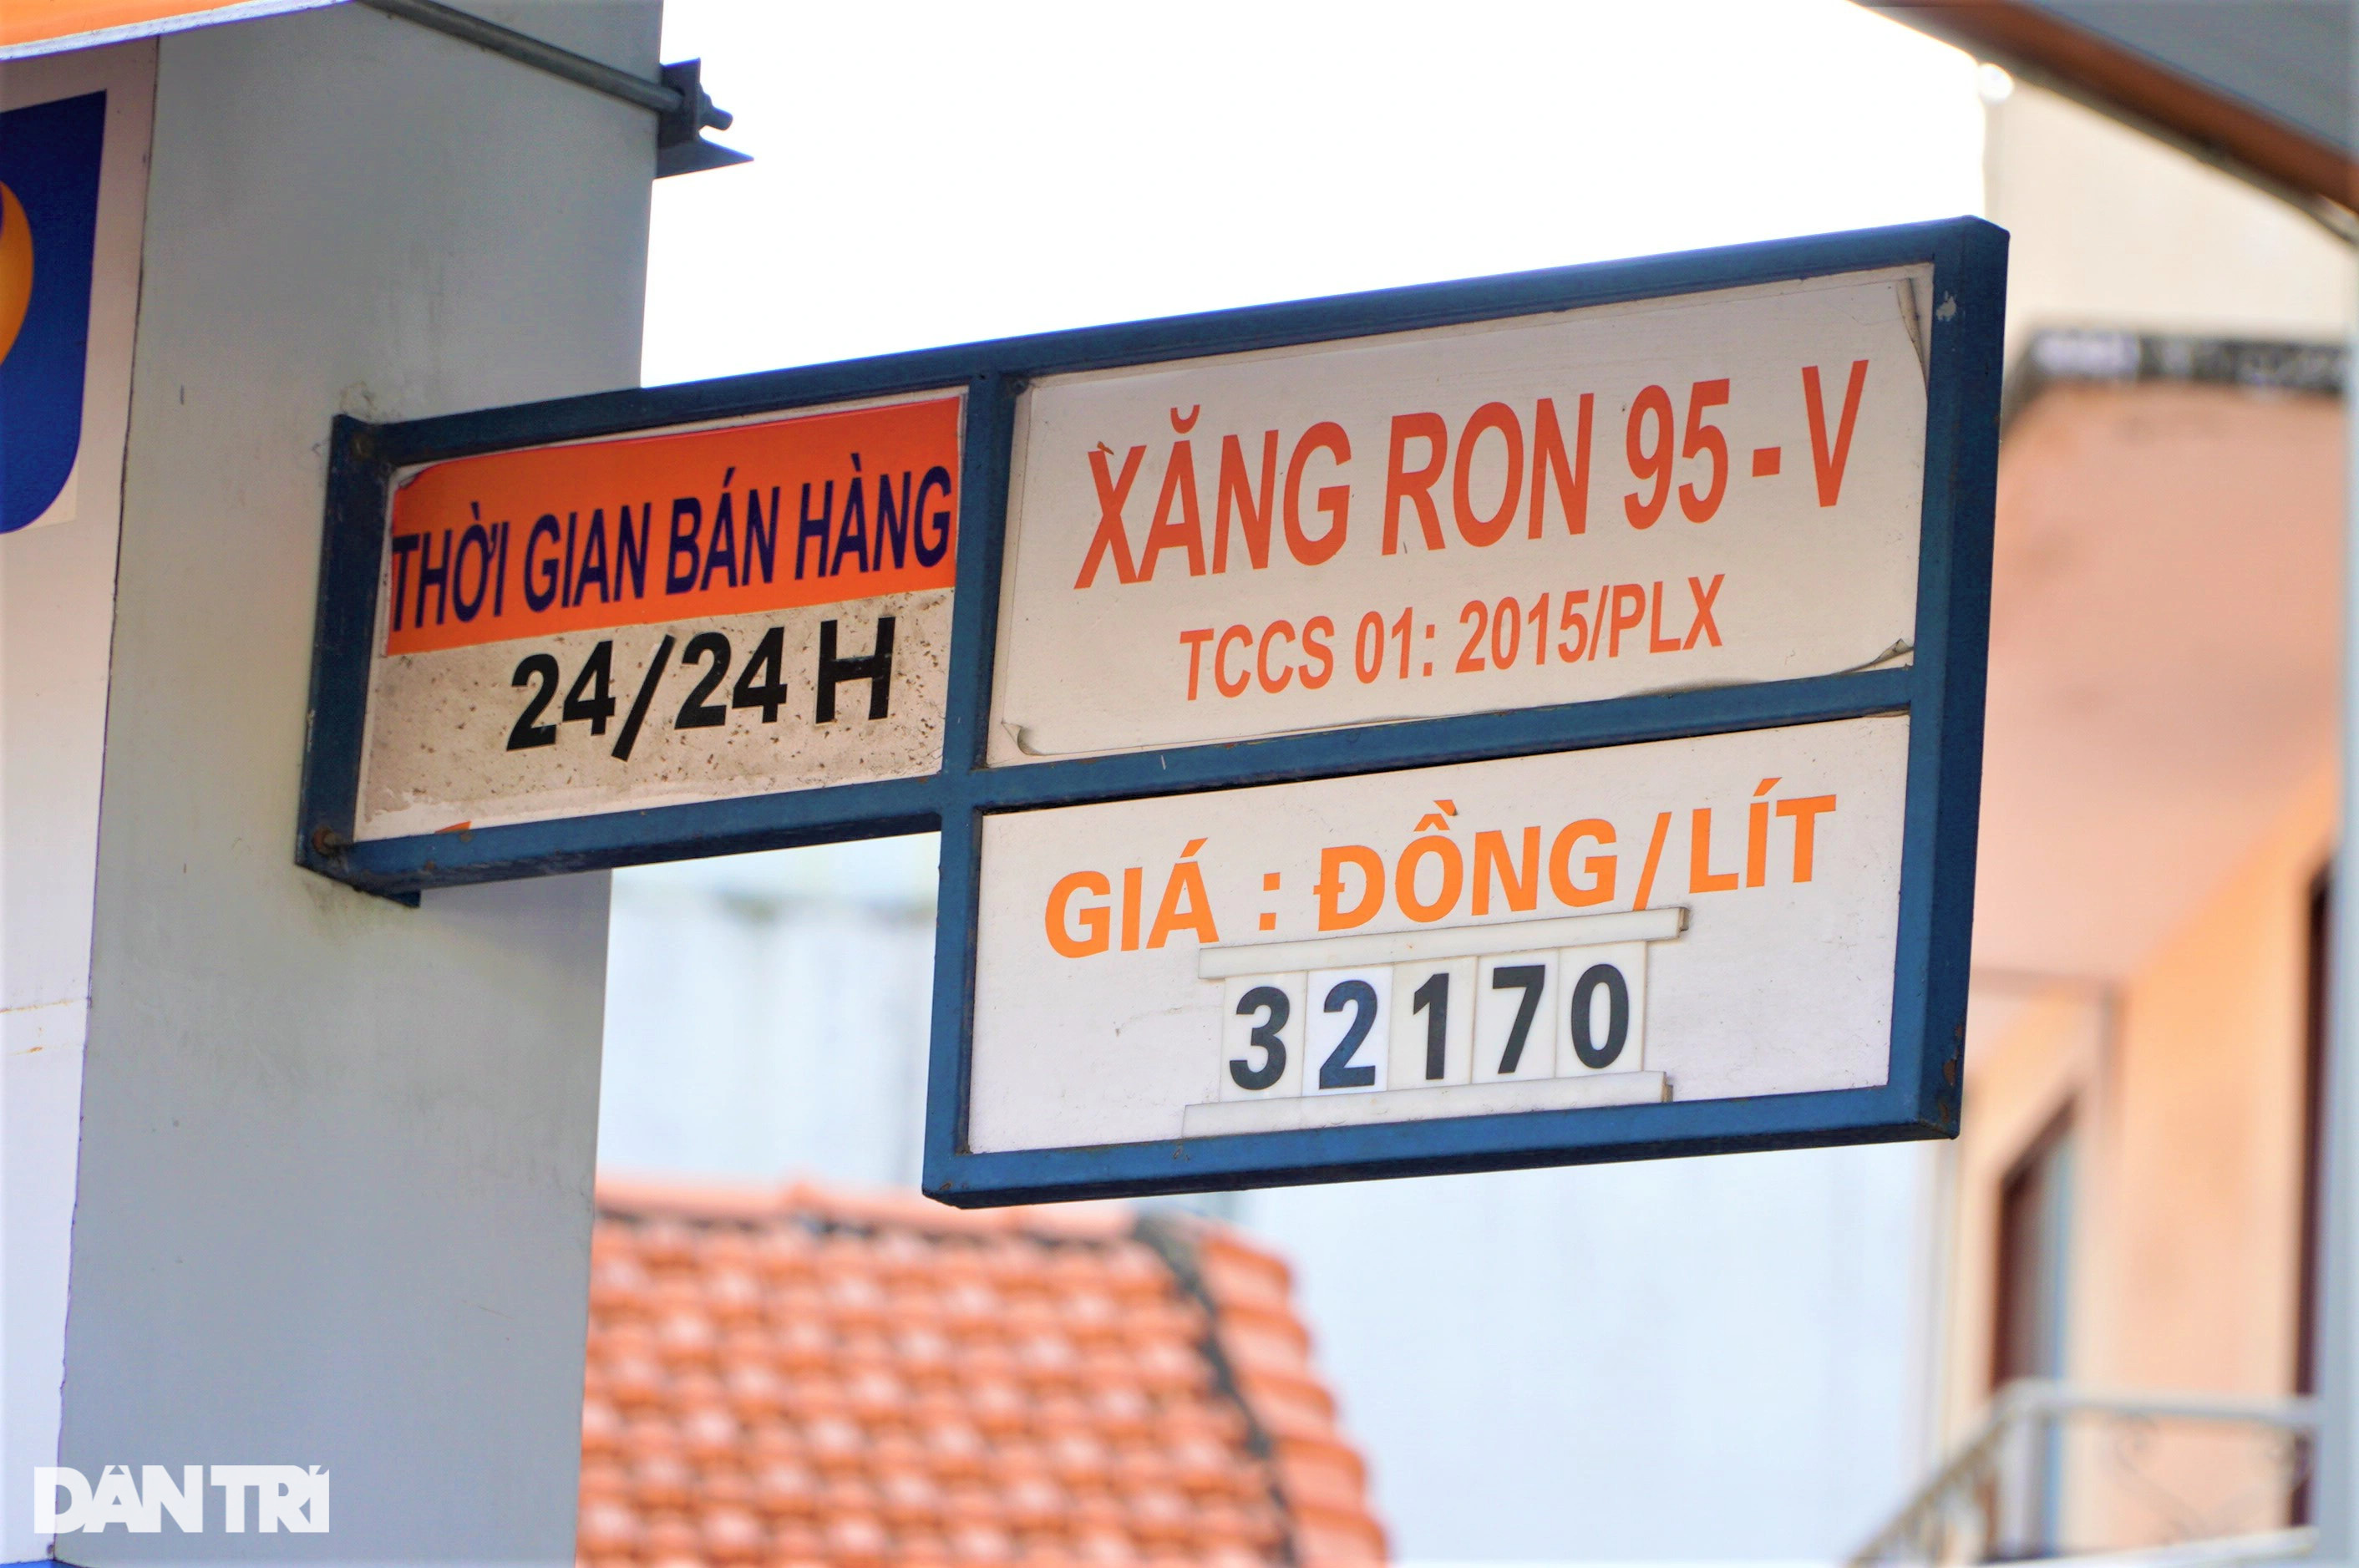 High-grade gasoline appeared nearly 33,000 VND / liter in Ho Chi Minh City, people were bored - 3